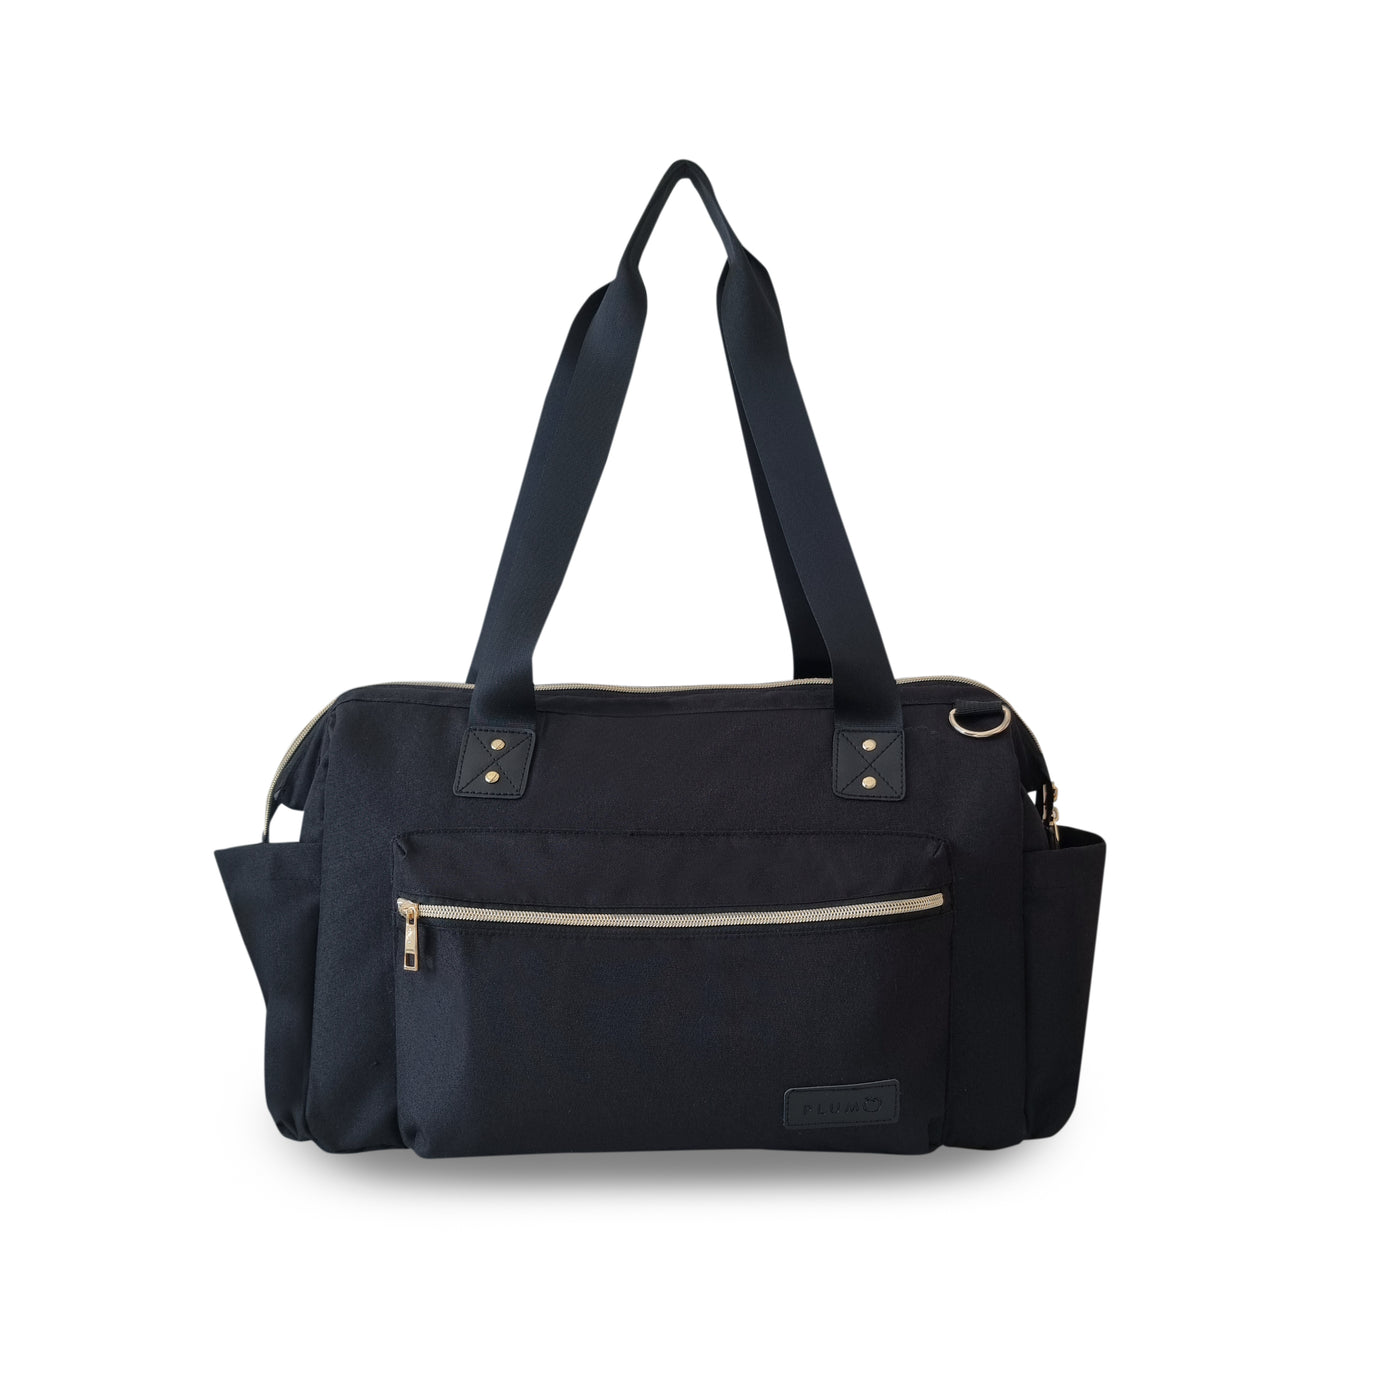 PLUM Tote Bag with Change Mat - Black